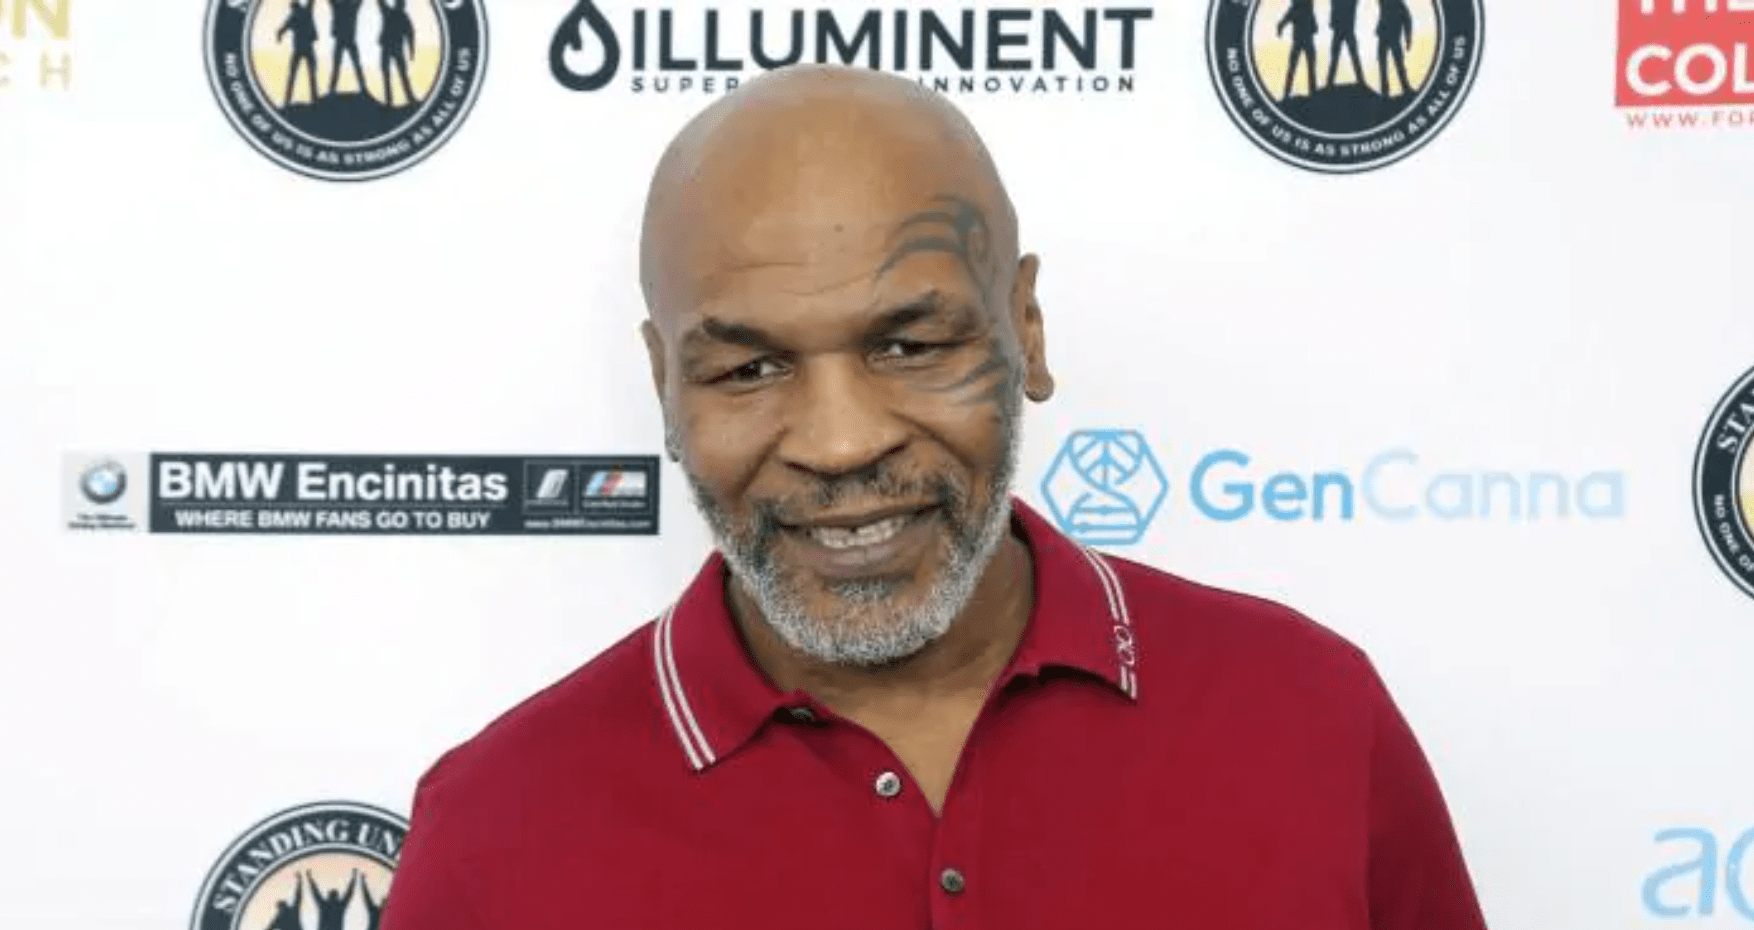 Mike Tyson: My Kids Think I Shouldn’t Fight But What Do They Know?